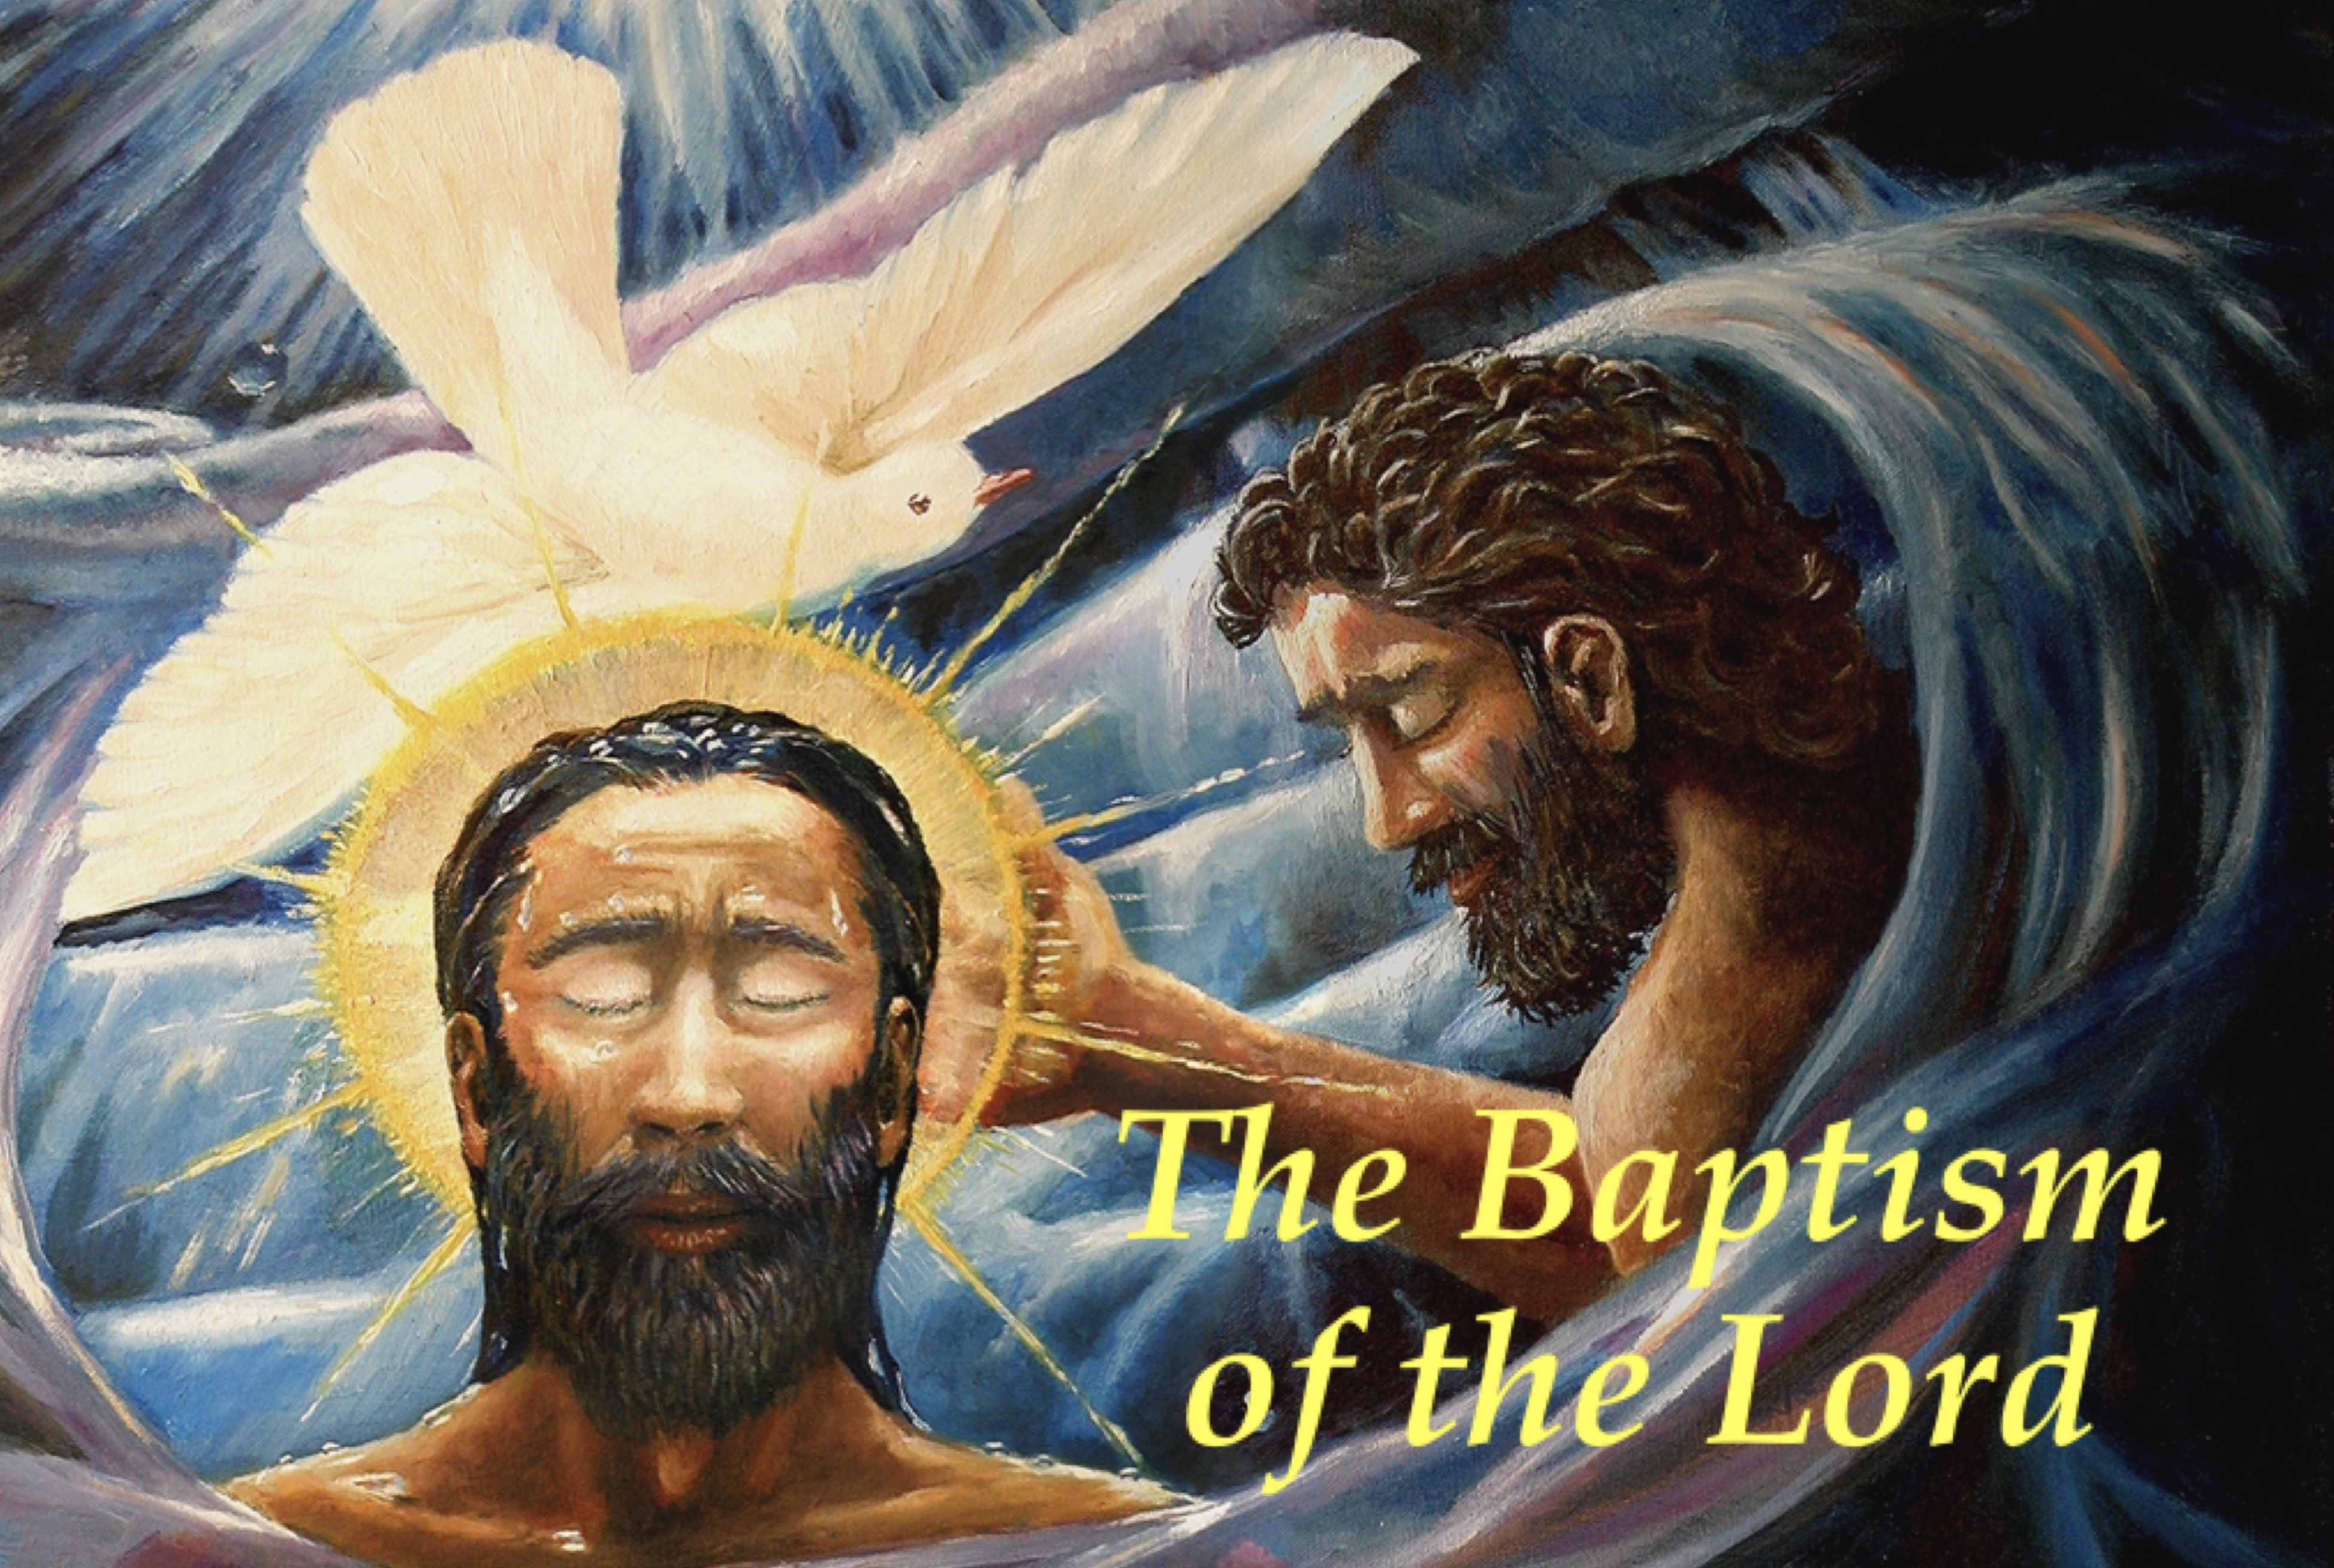 9th January - The Baptism of the Lord